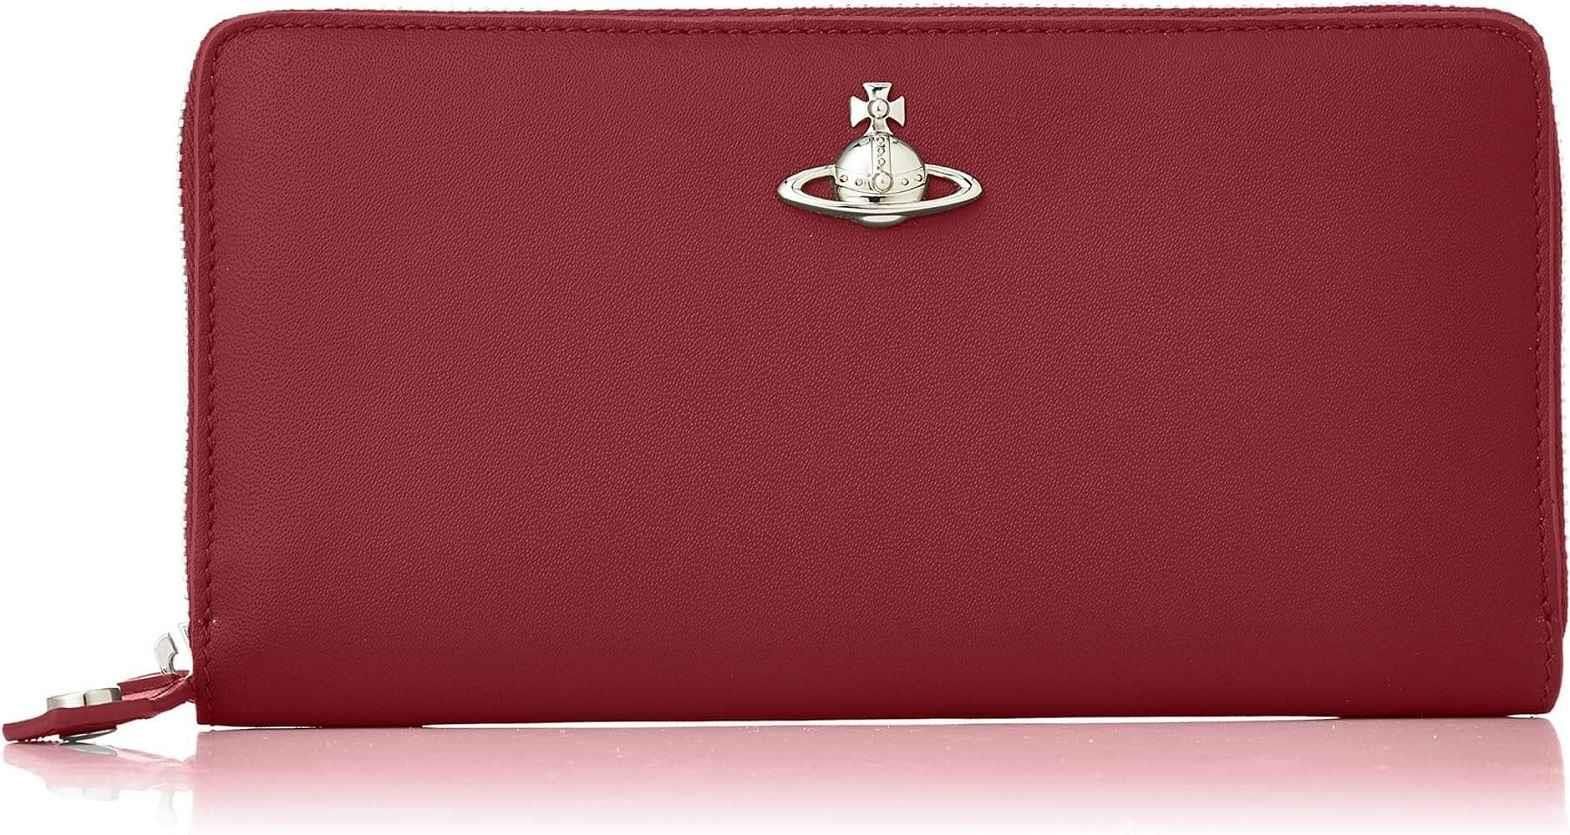 The Art of Women's Wallets: Functionality Meets Fashion